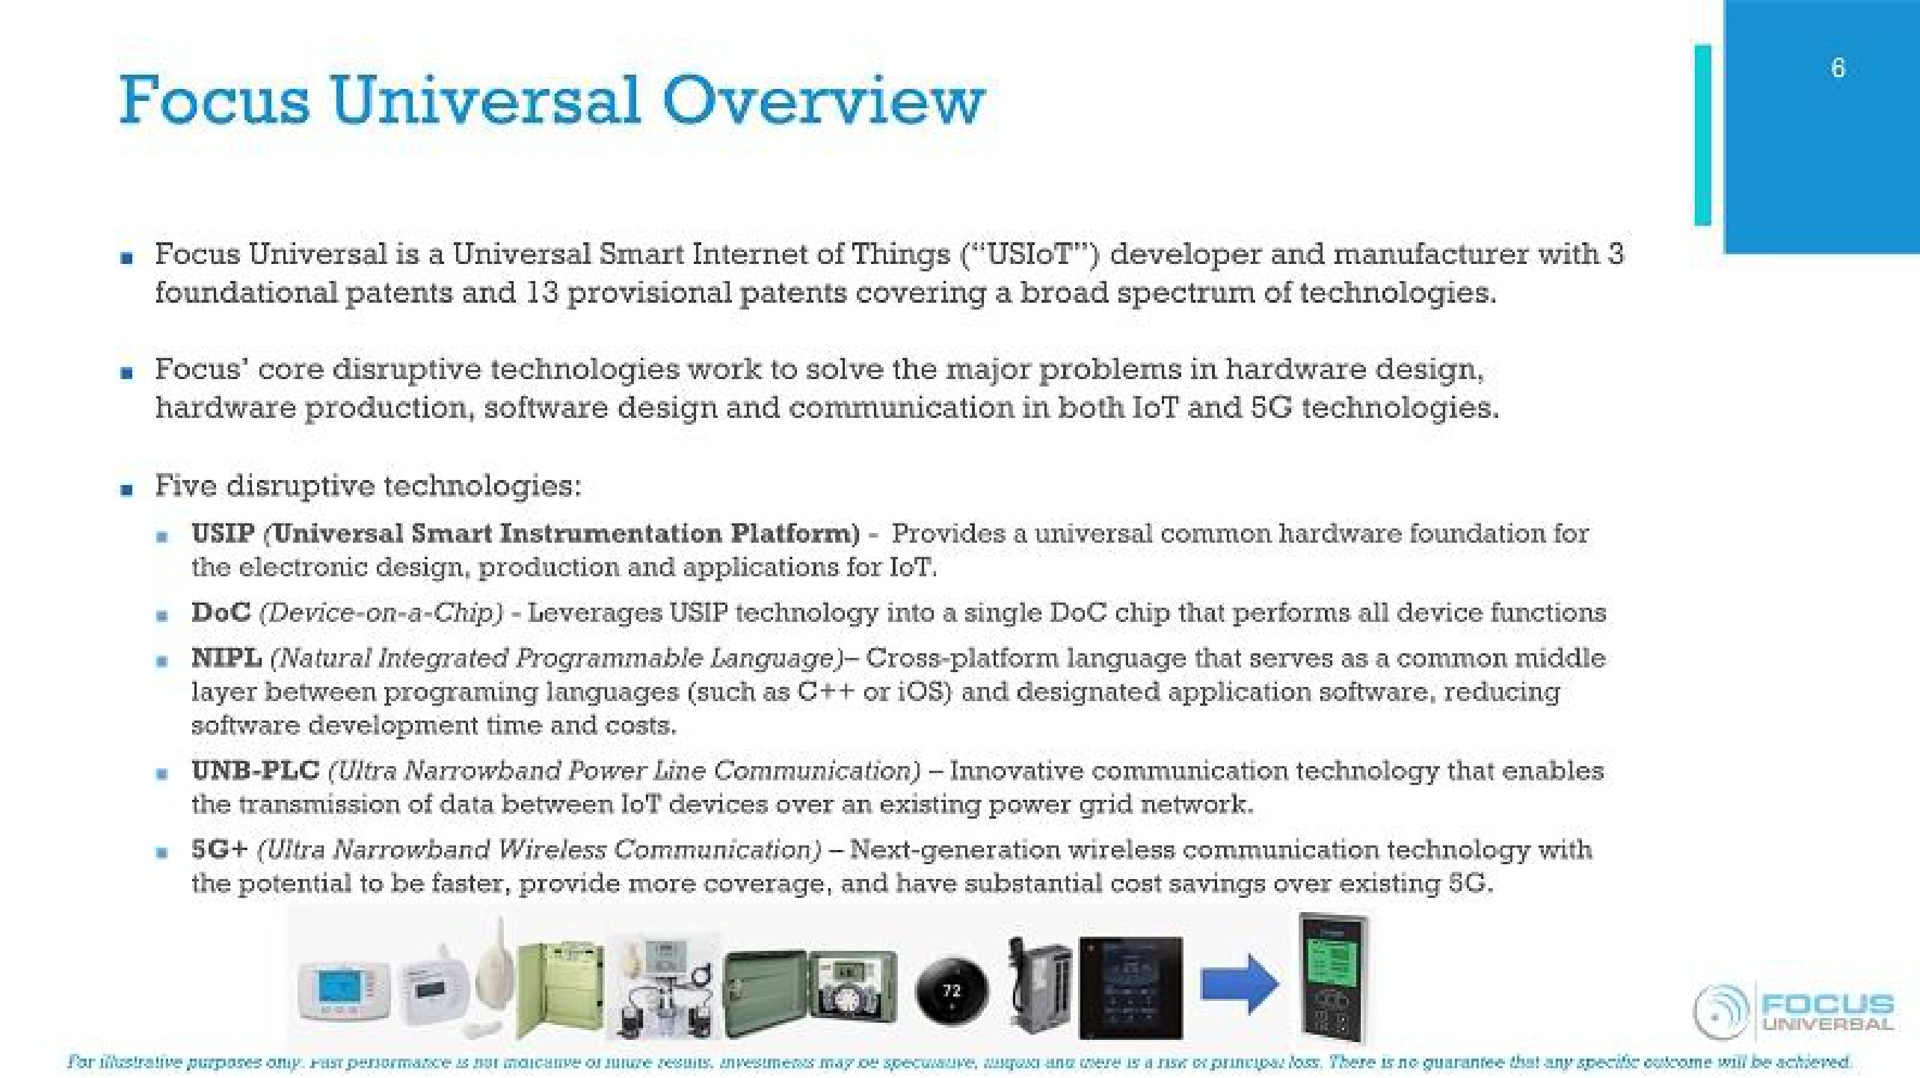 focus universal overview foundational patents and provisional patents covering a broad spectrum of technologies hardware production design and communication in both and technologies | Focus Universal